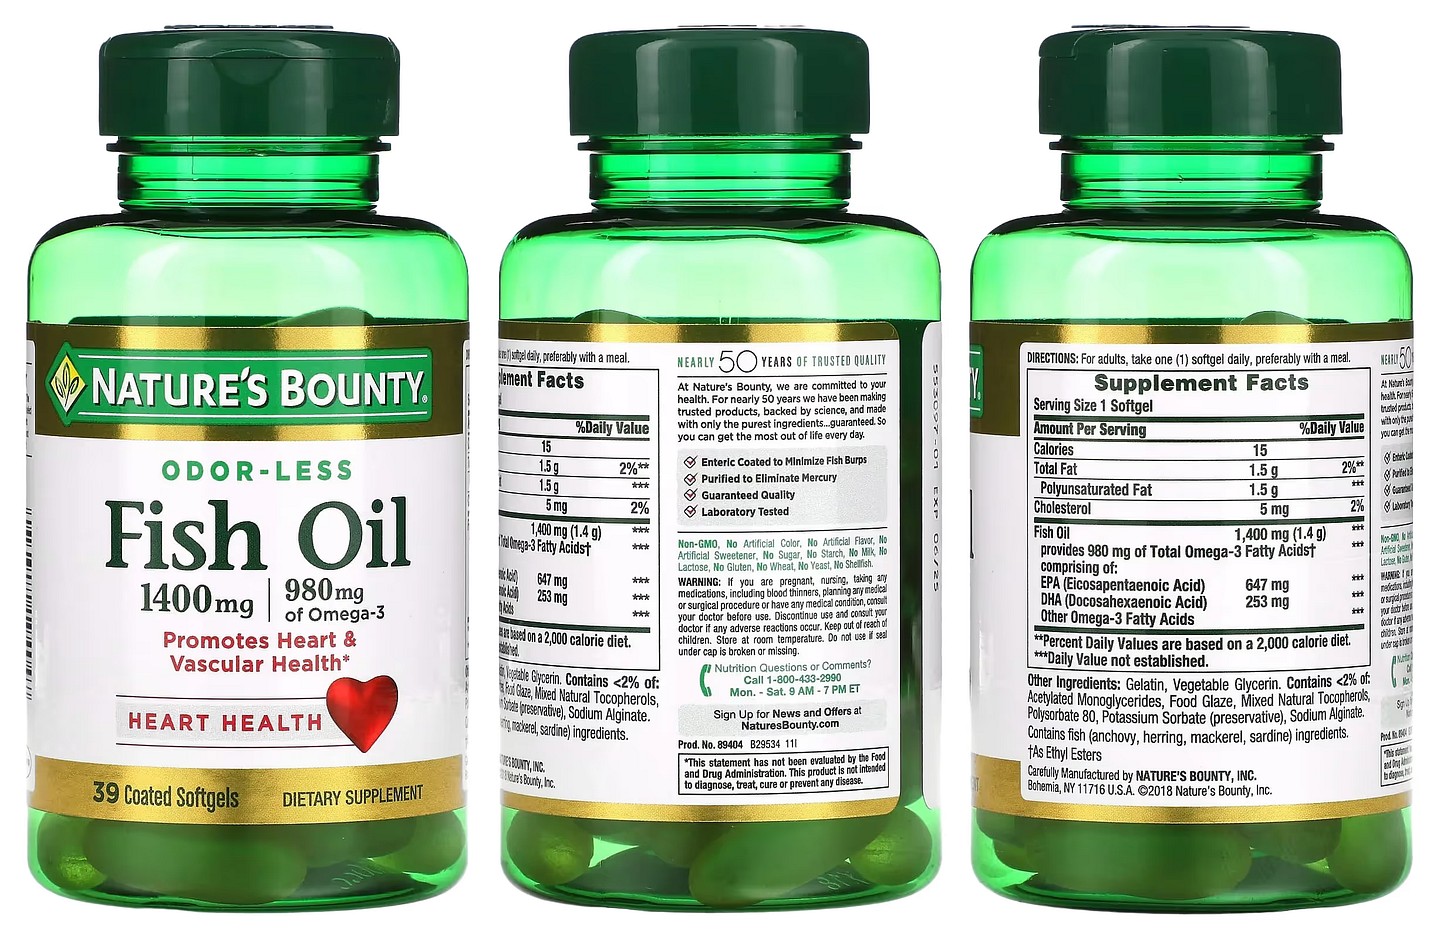 Nature's Bounty, Odor-Less Fish Oil packaging